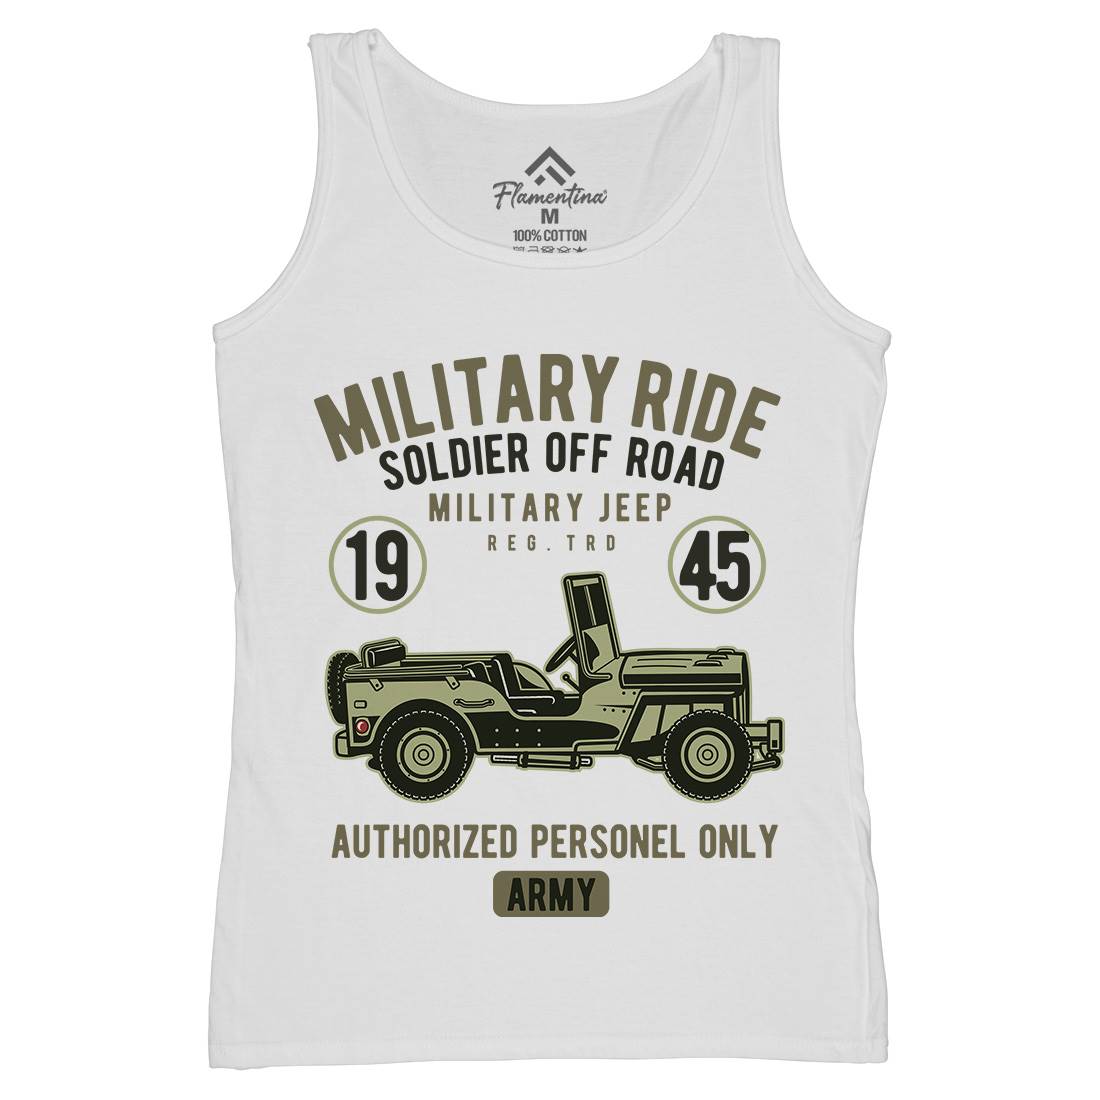 Military Ride Womens Organic Tank Top Vest Army D549